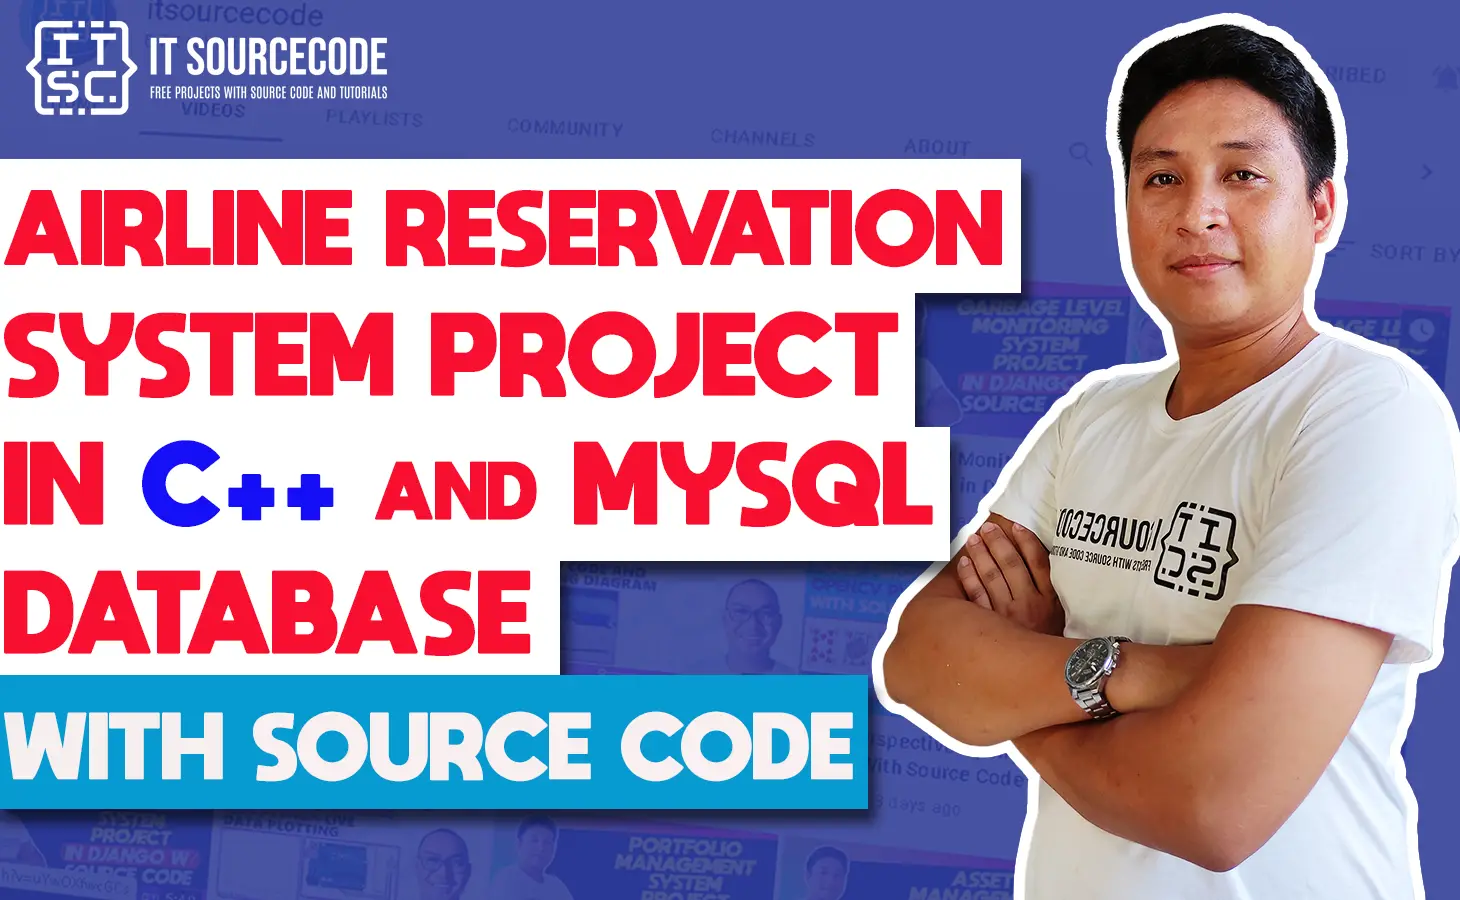 Airlines Reservation System Project in C++ and MySQL Database